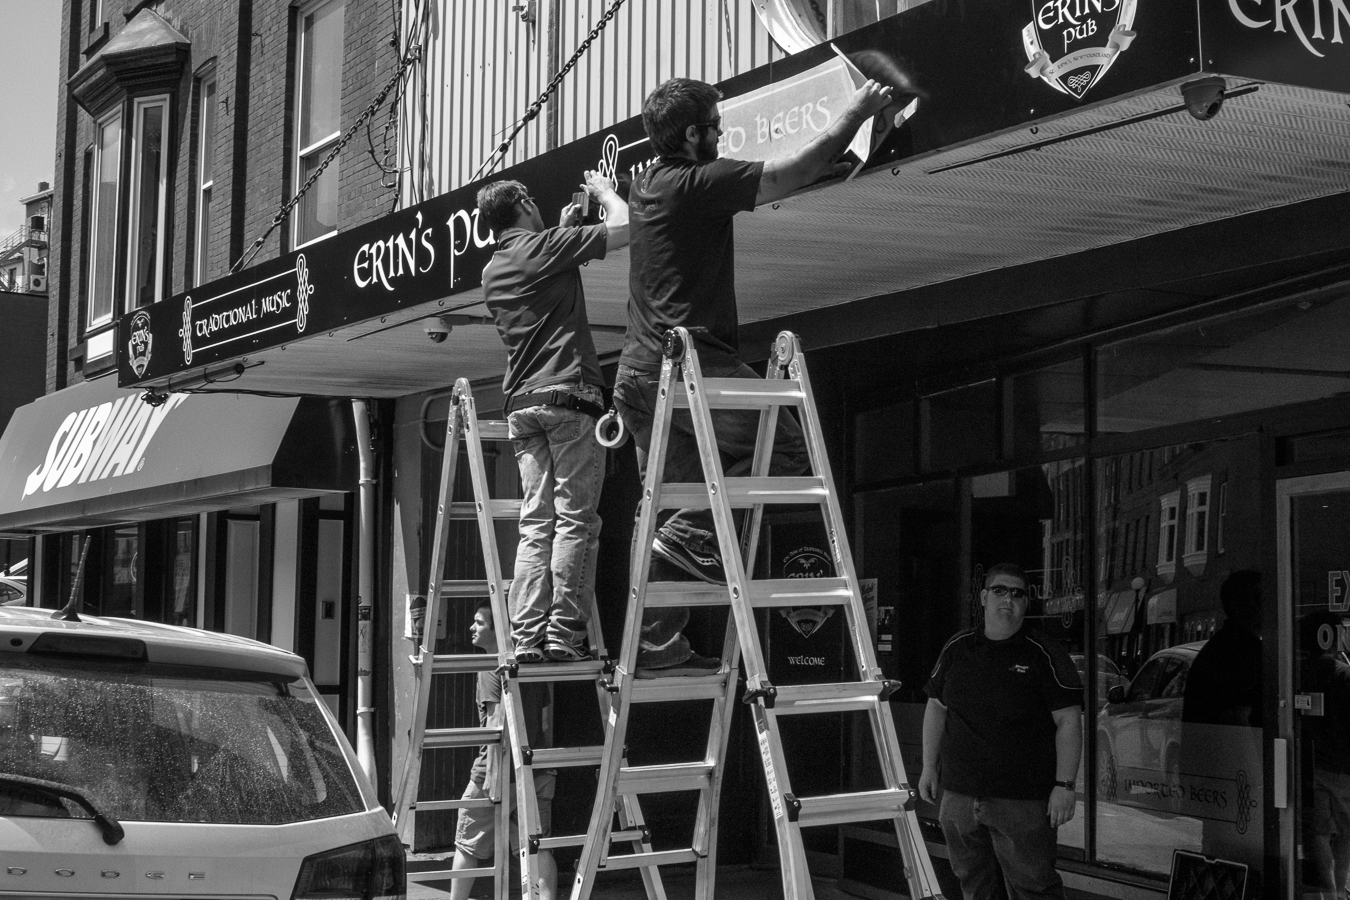 Sign workers installing new lettering. - Erins Pub - Water Street